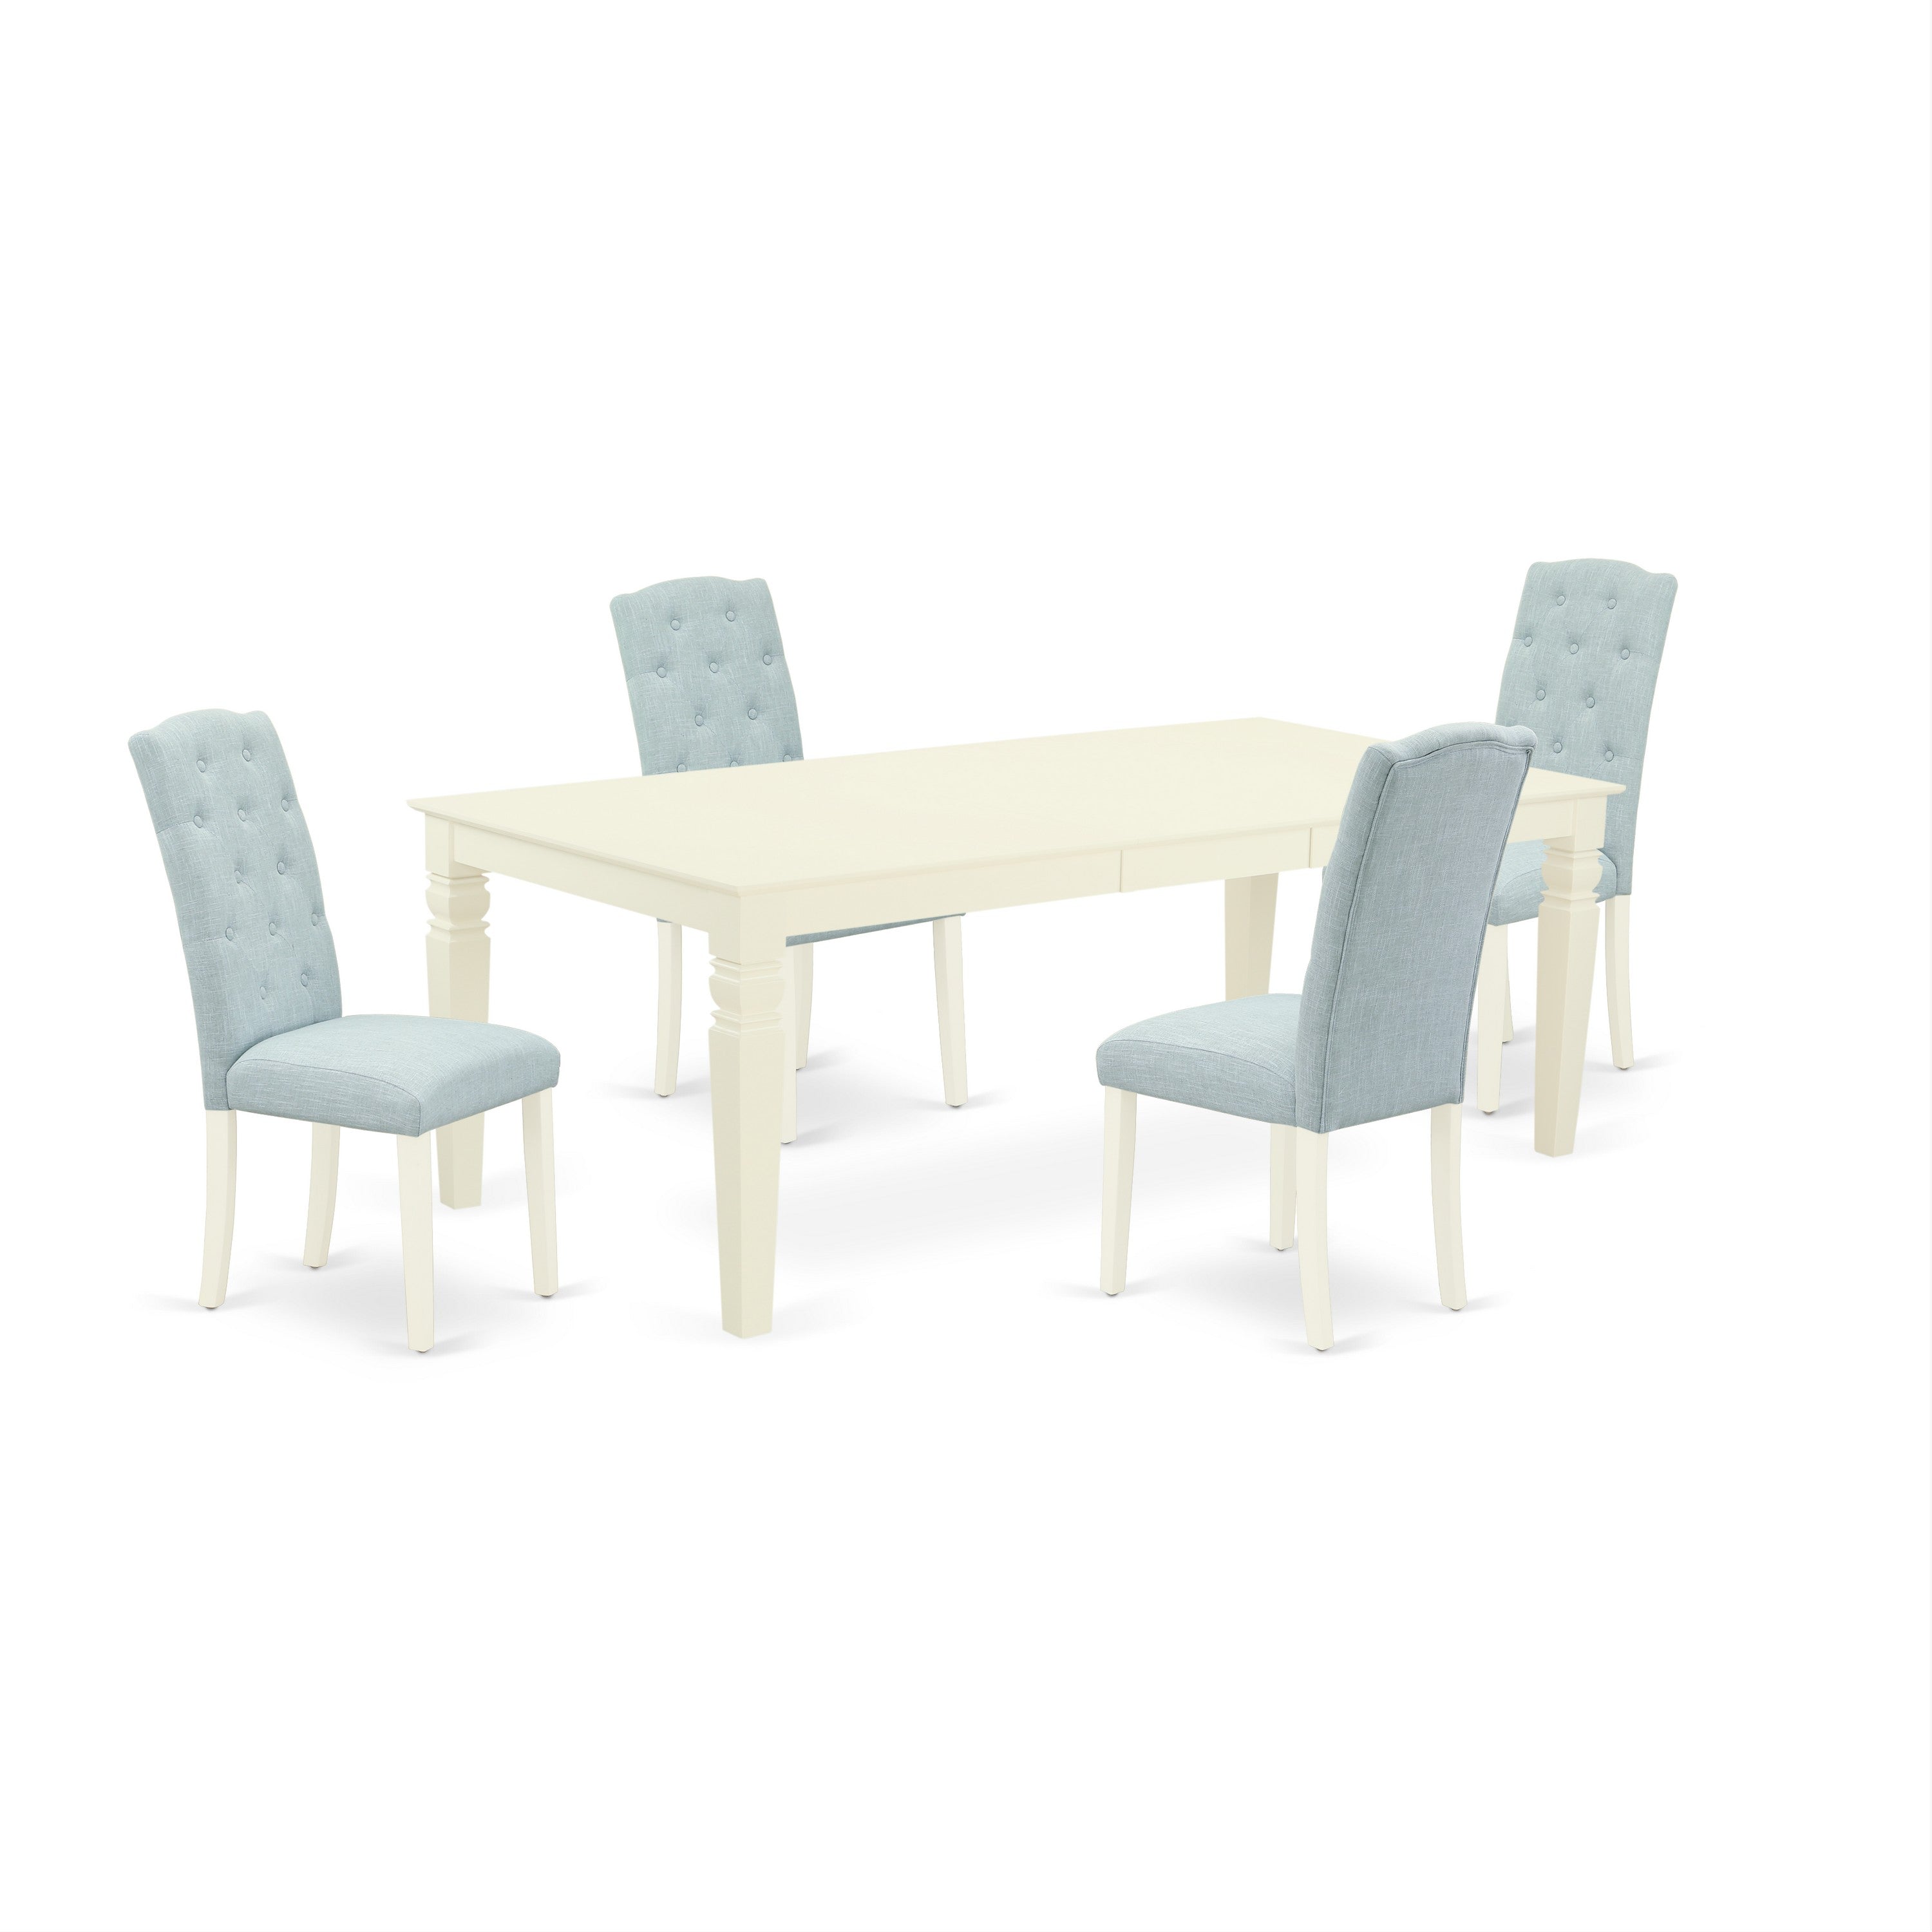 LGCE5-LWH-15 5Pc Dining Set Includes a Rectangle Dining Table with Butterfly Leaf and Four Parson Chairs with Baby Blue Fabric, Linen White Finish